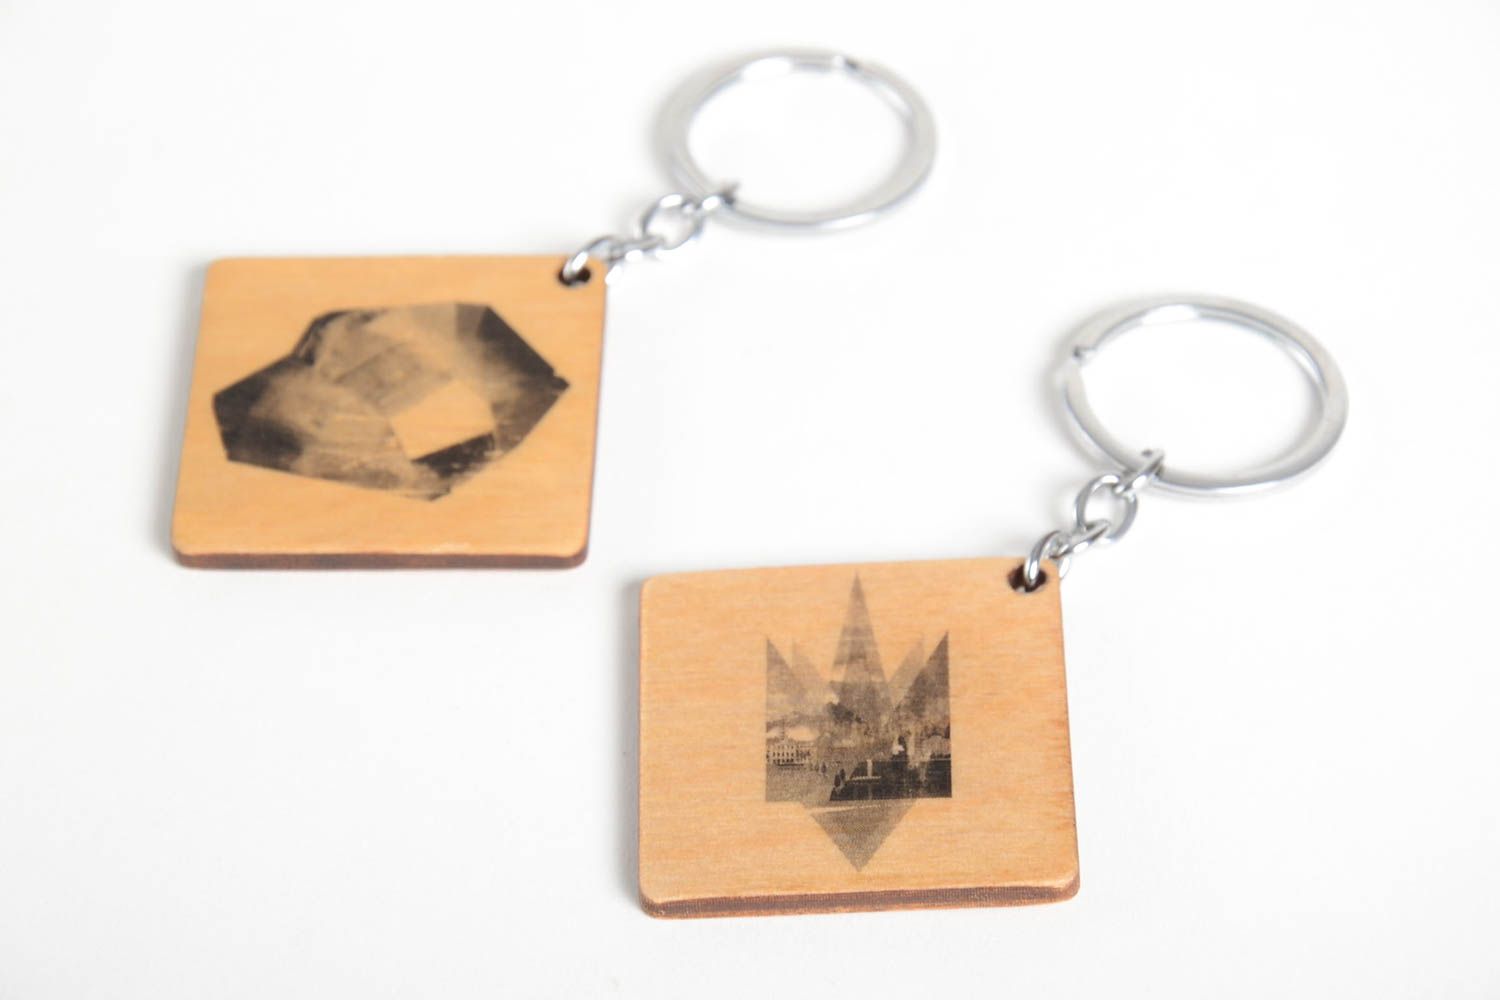 Handmade keychains set of 2 products wooden souvenir unusual gift ideas photo 2